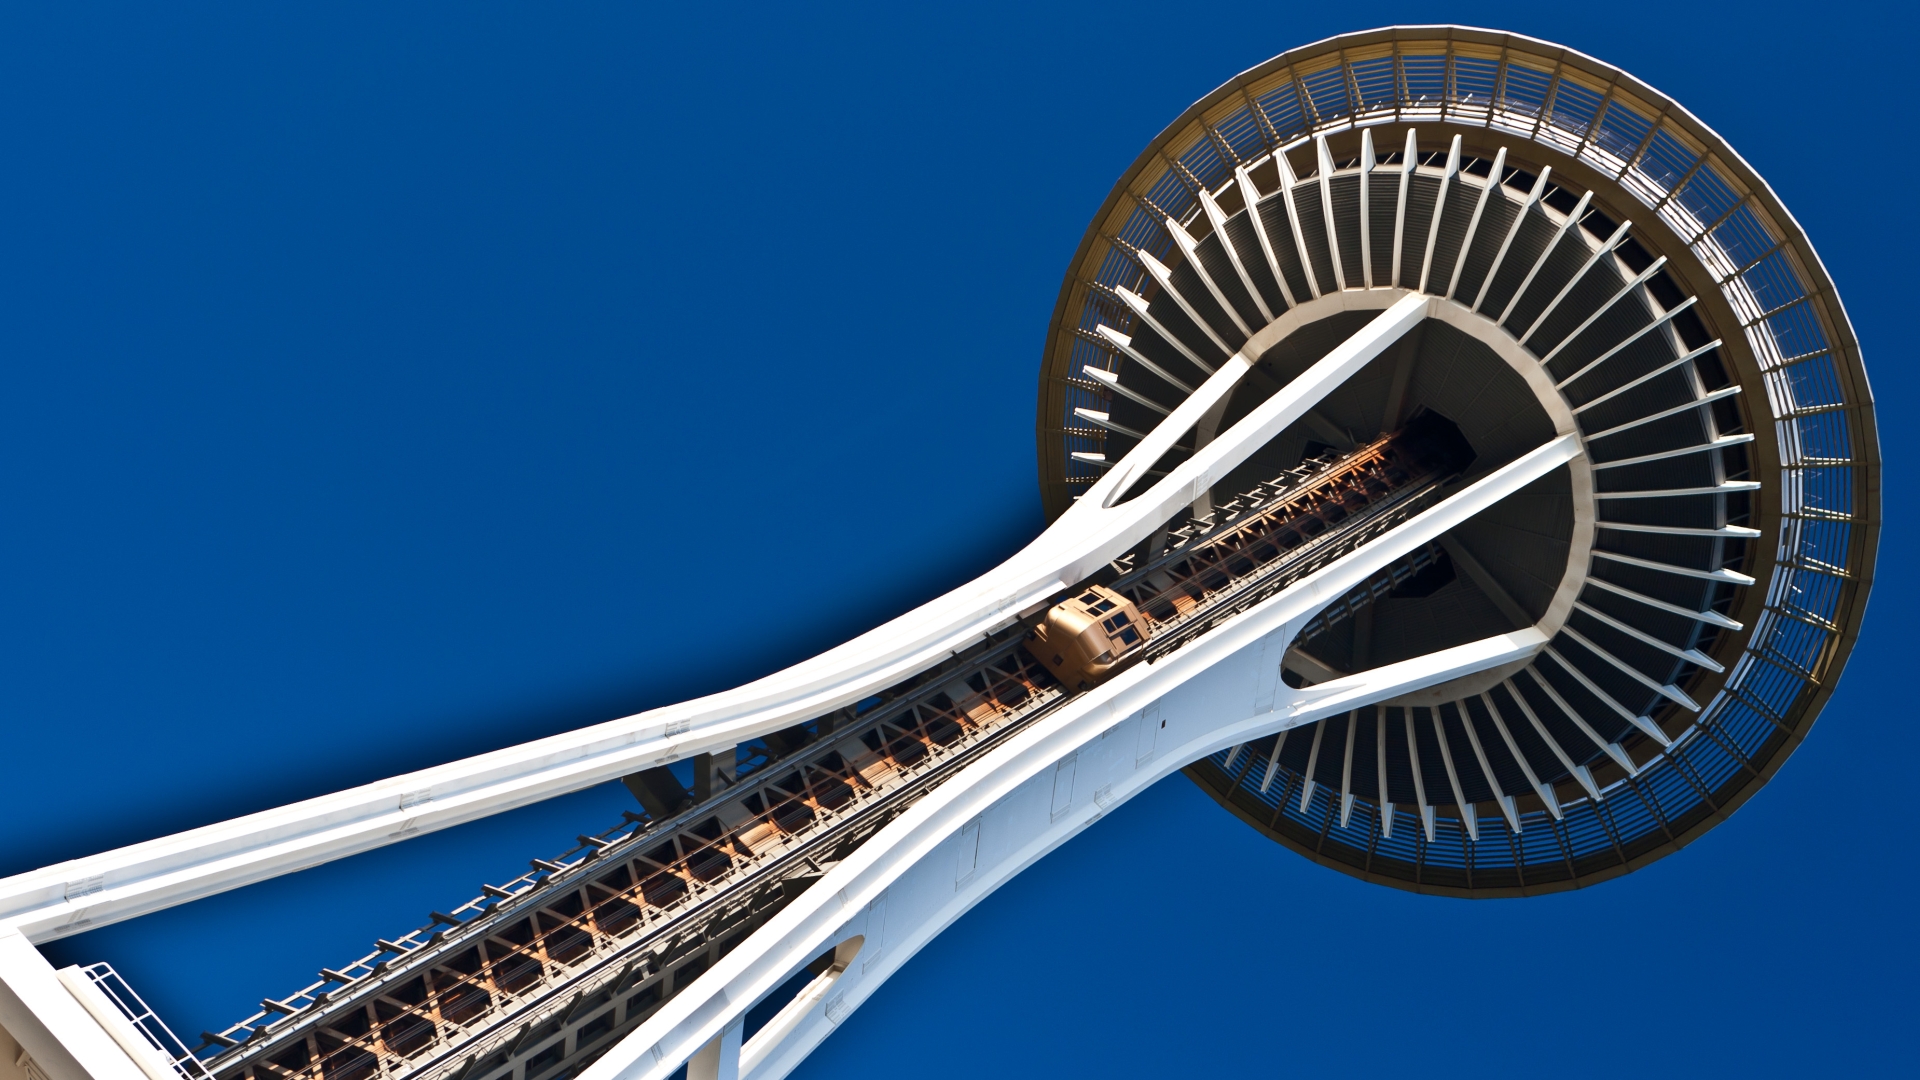 man made, space needle